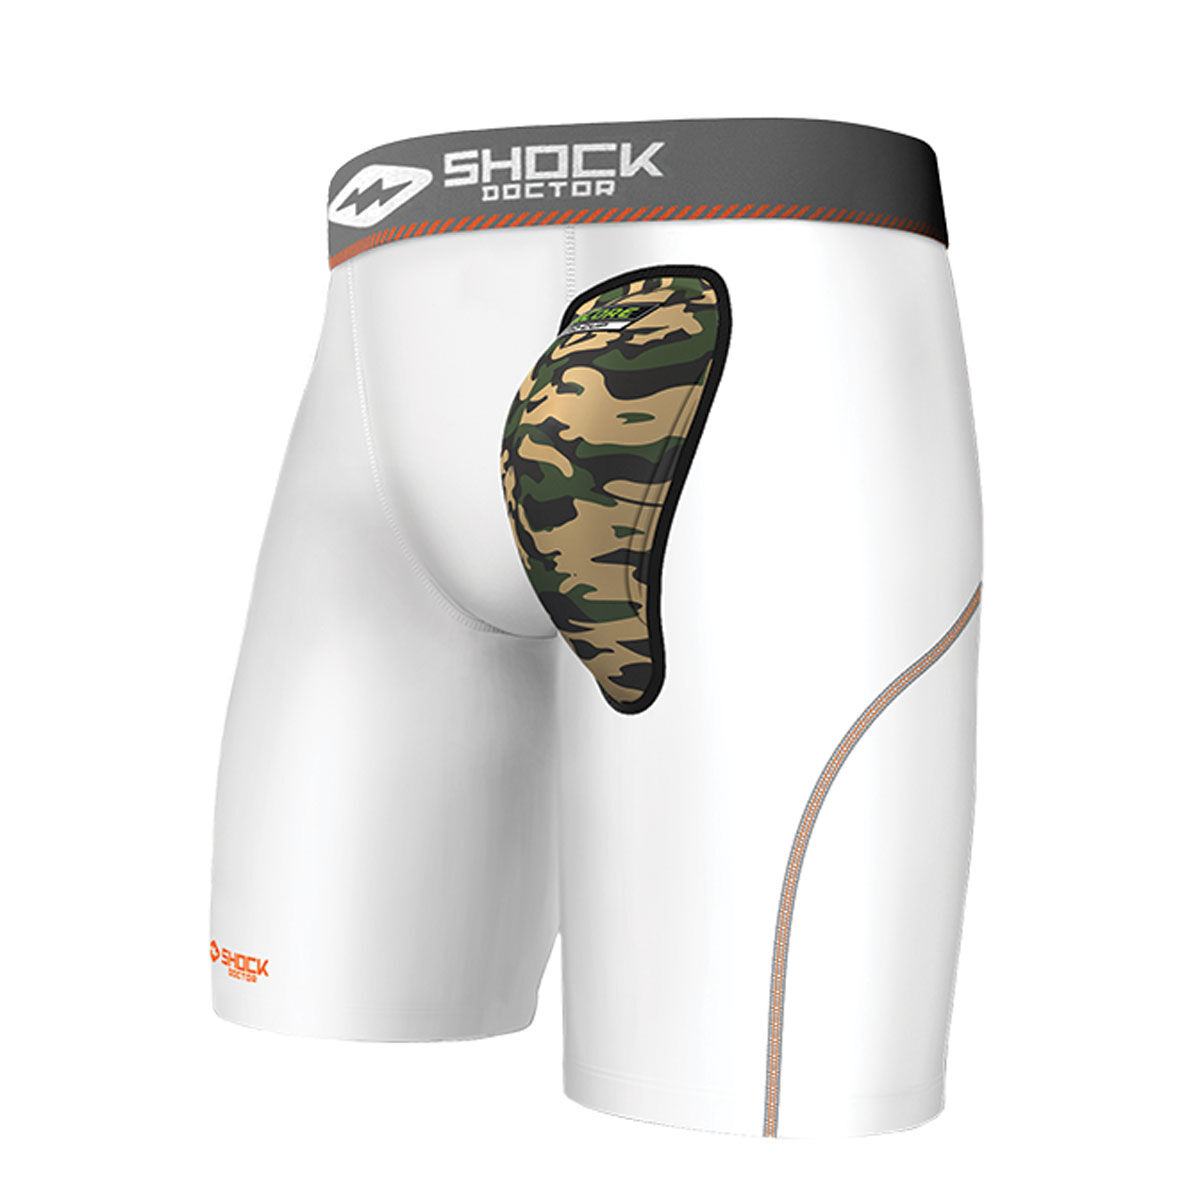 SHOCK DOCTOR 254 ULTRA DOUBLE COMPRESSION SHORT WITH ULTRA CARBON FLEX CUP   YouTube